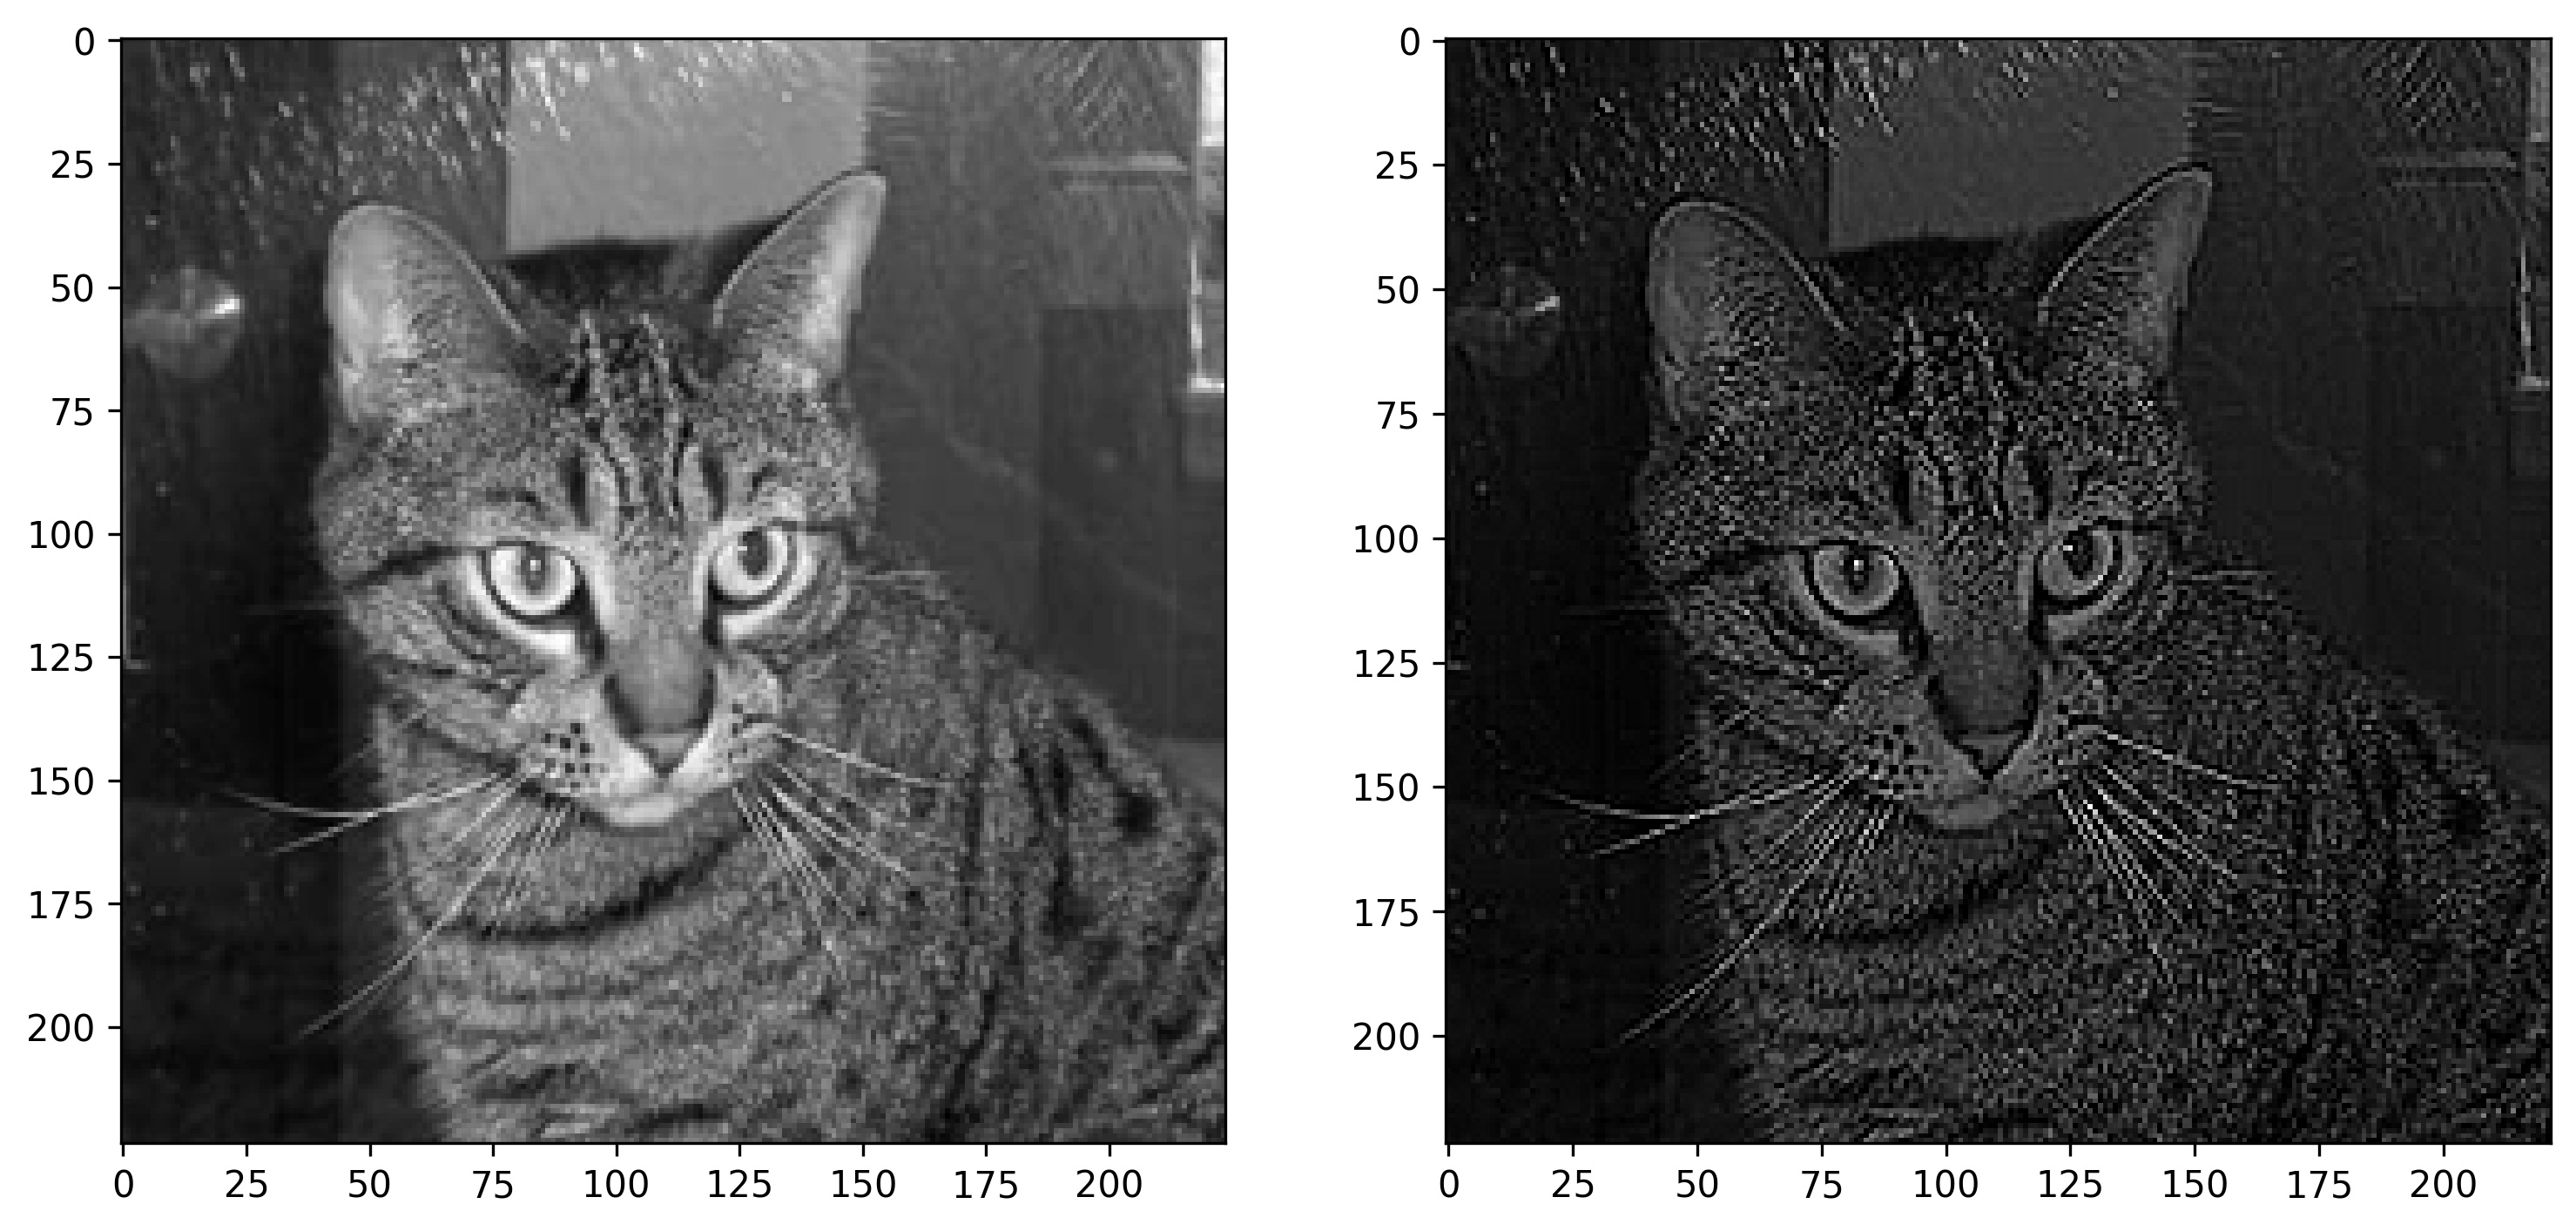 Image 9 — Cat image before and after sharpening (2) (image by author)